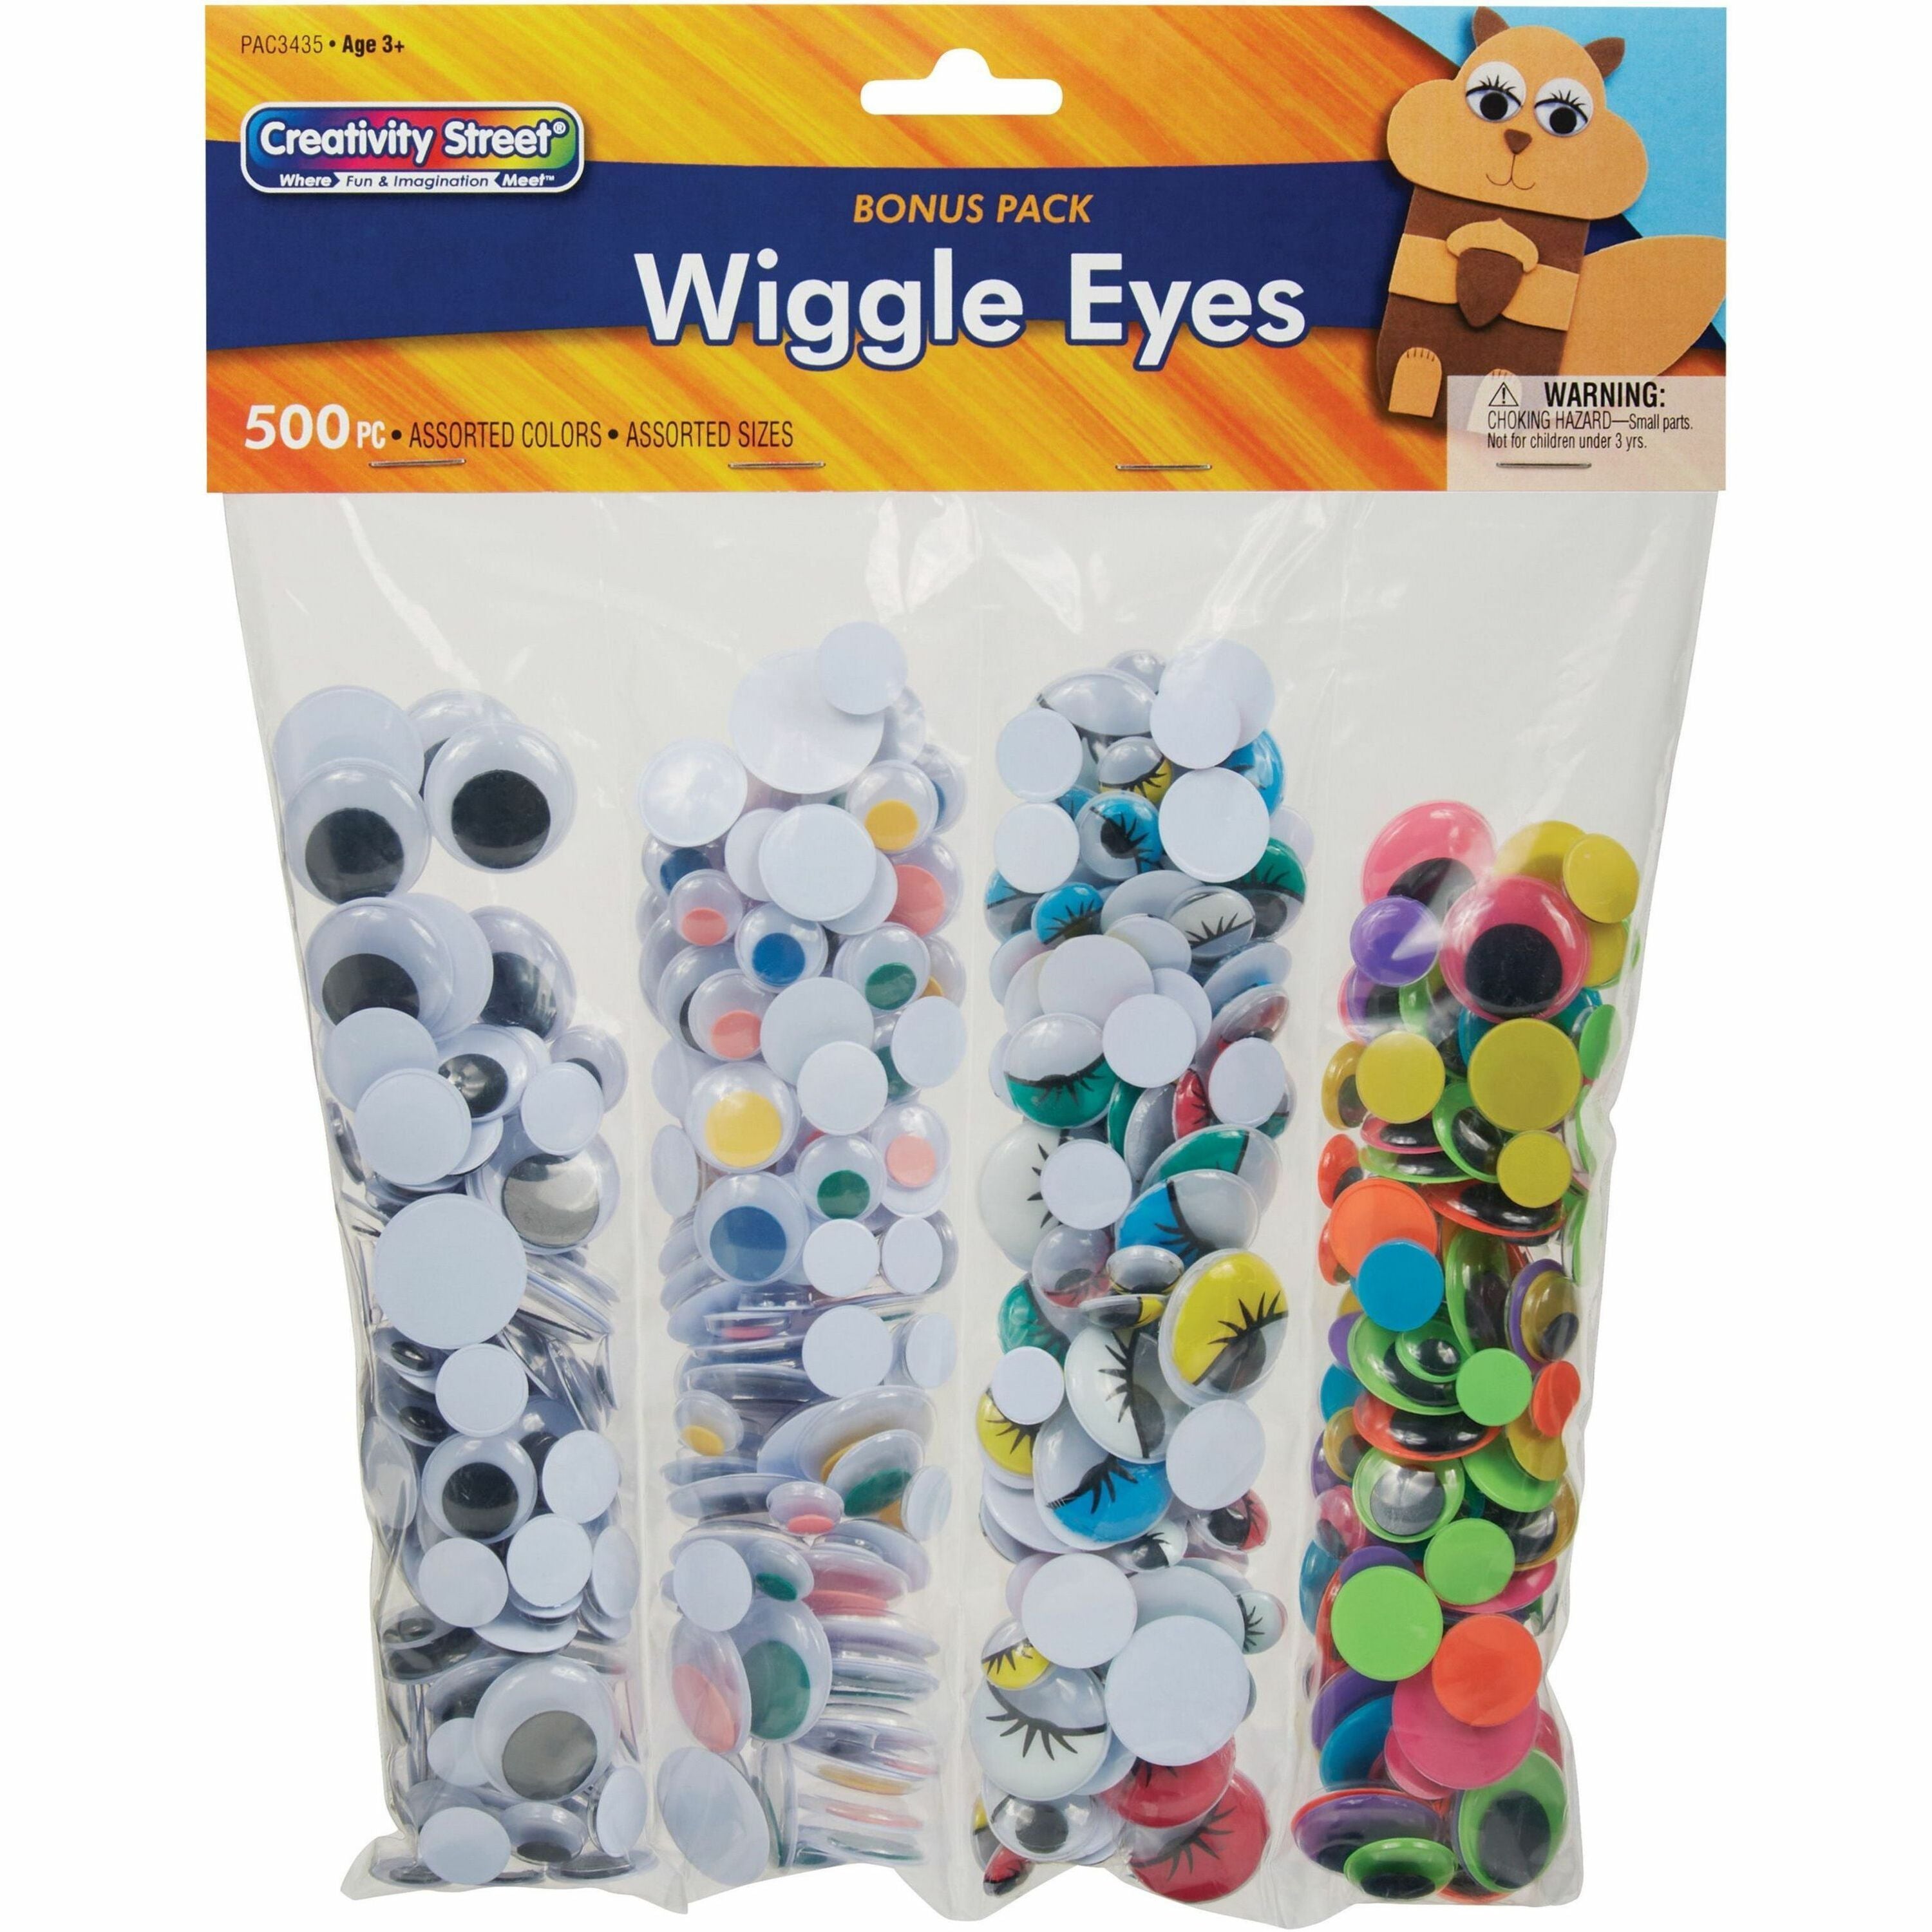 creativity-street-wiggle-eyes-assortment-craft-500-pieces-500-pack-assorted_pac3435 - 1